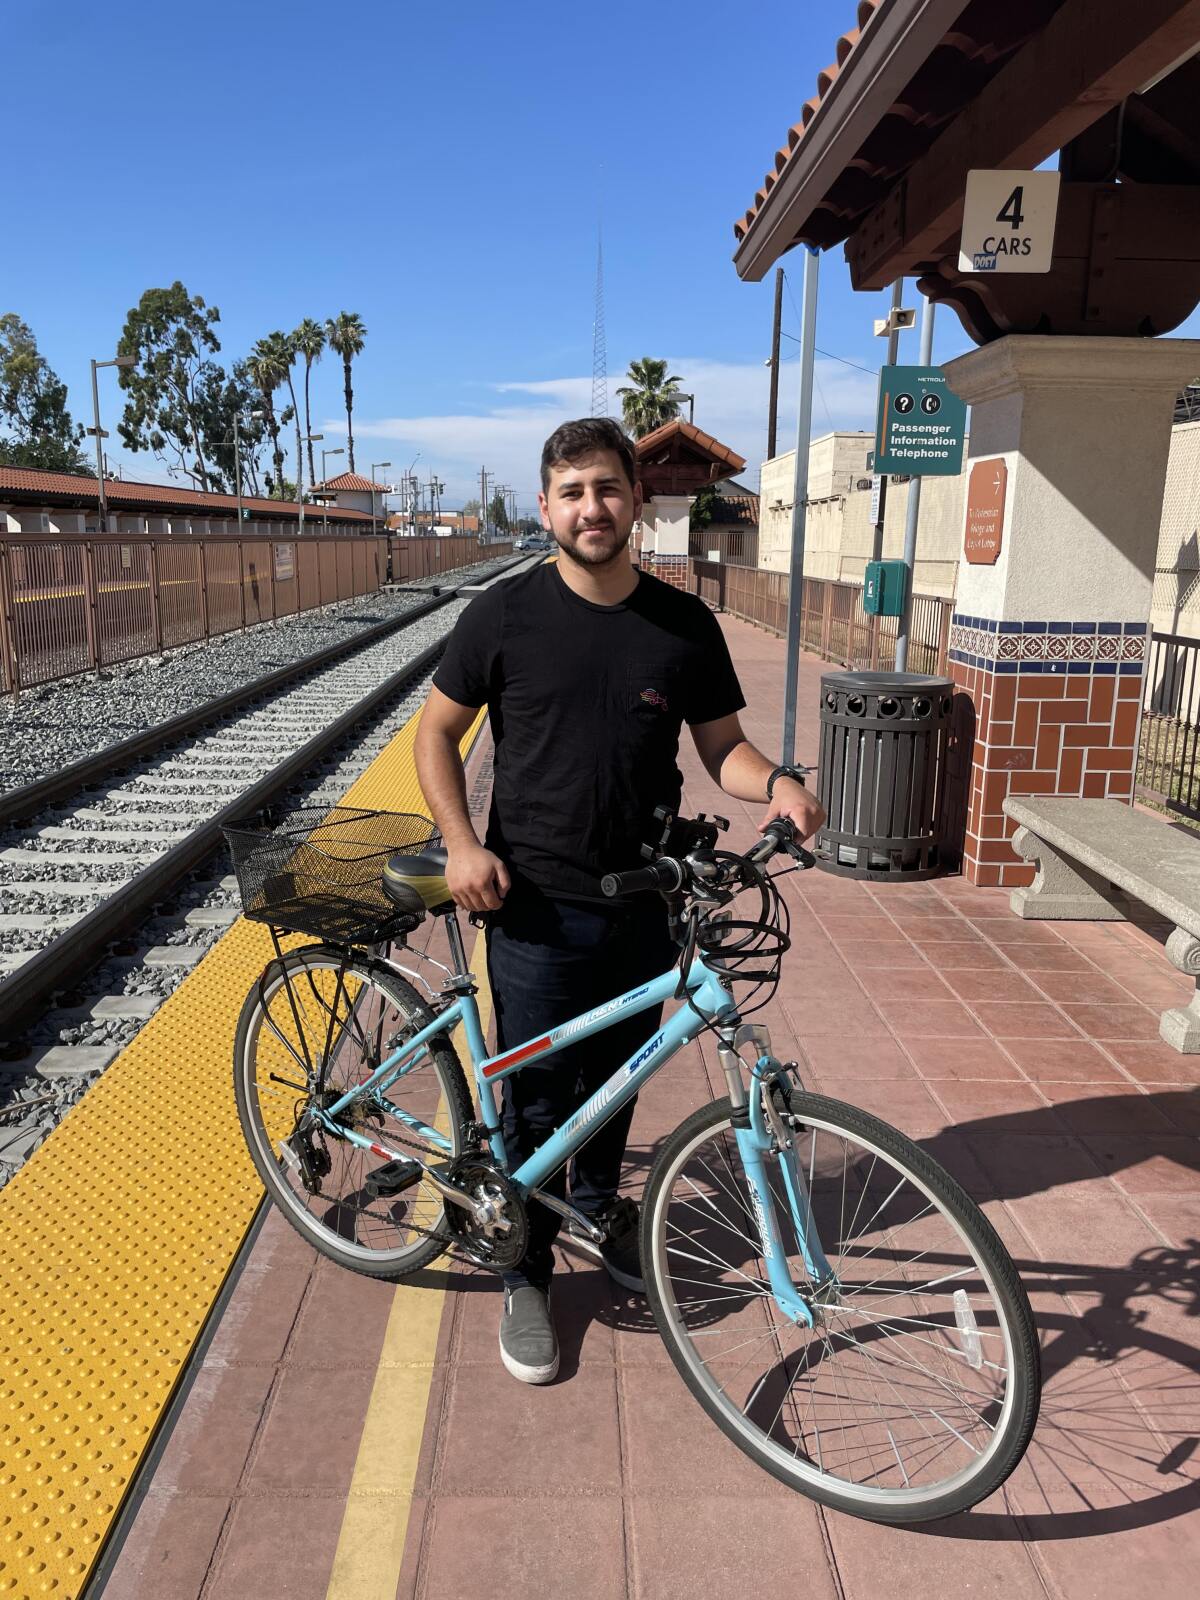 Costa Mesa resident Marc Vukcevich helped change a state law prohibiting the enforcement of outdated bike licensing rules.